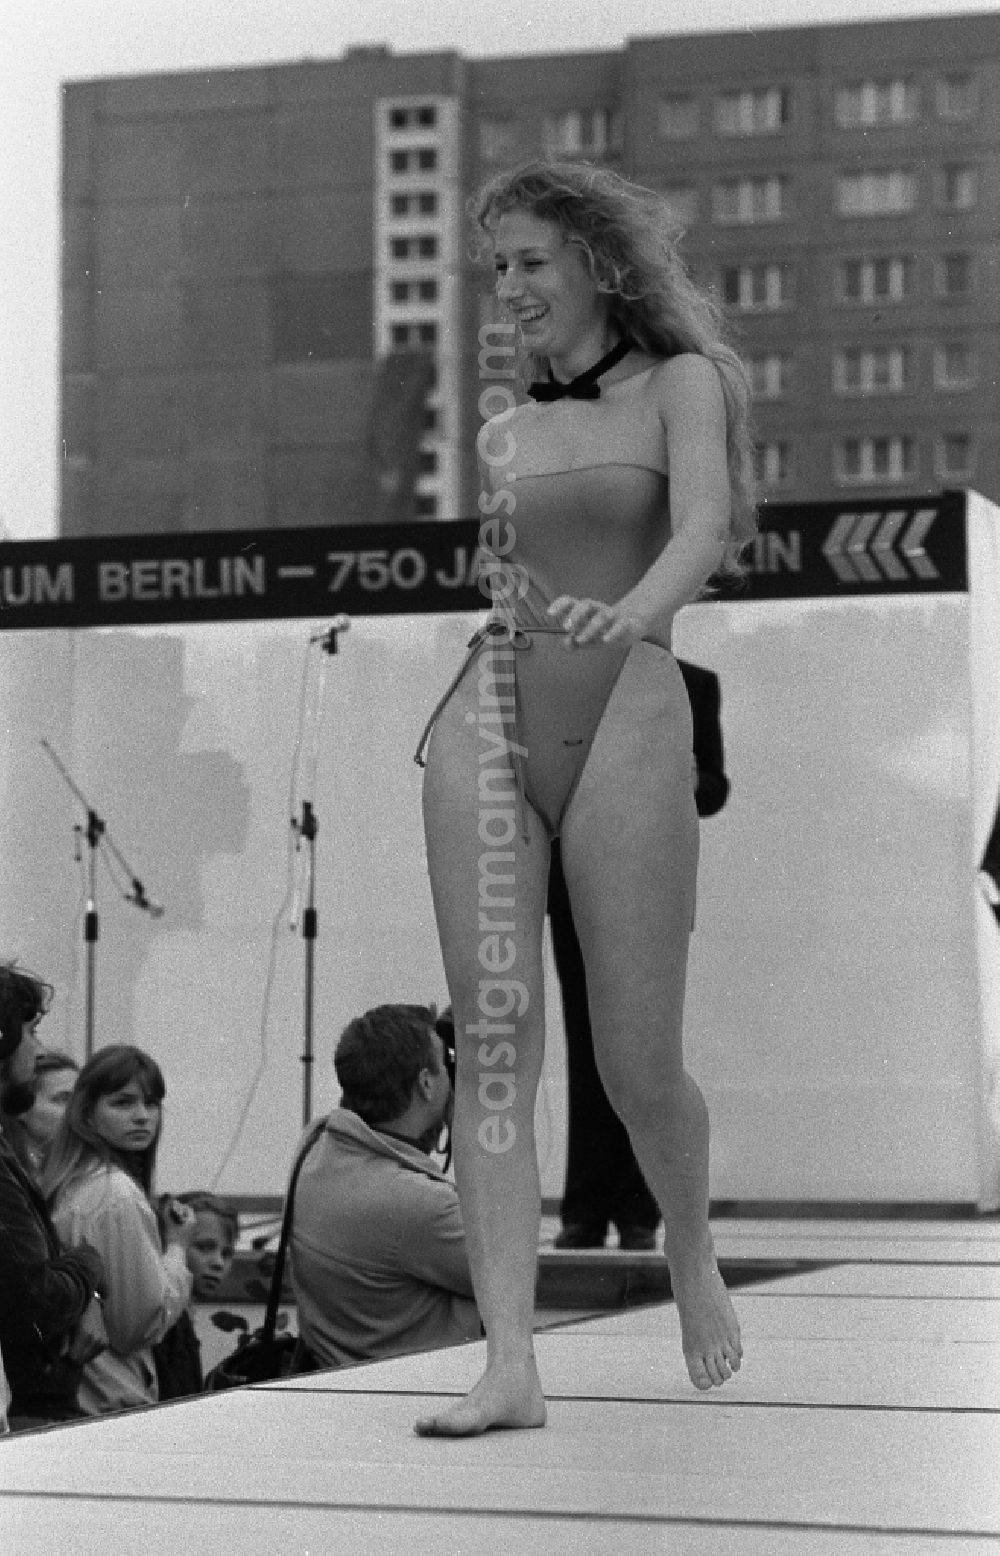 GDR photo archive: Berlin - Event and demonstration for the Wahl Miss Fruehling in the district of Marzahn in Berlin East Berlin on the territory of the former GDR, German Democratic Republic. Young girls and women present new swimwear and bikinis on the fashion catwalk